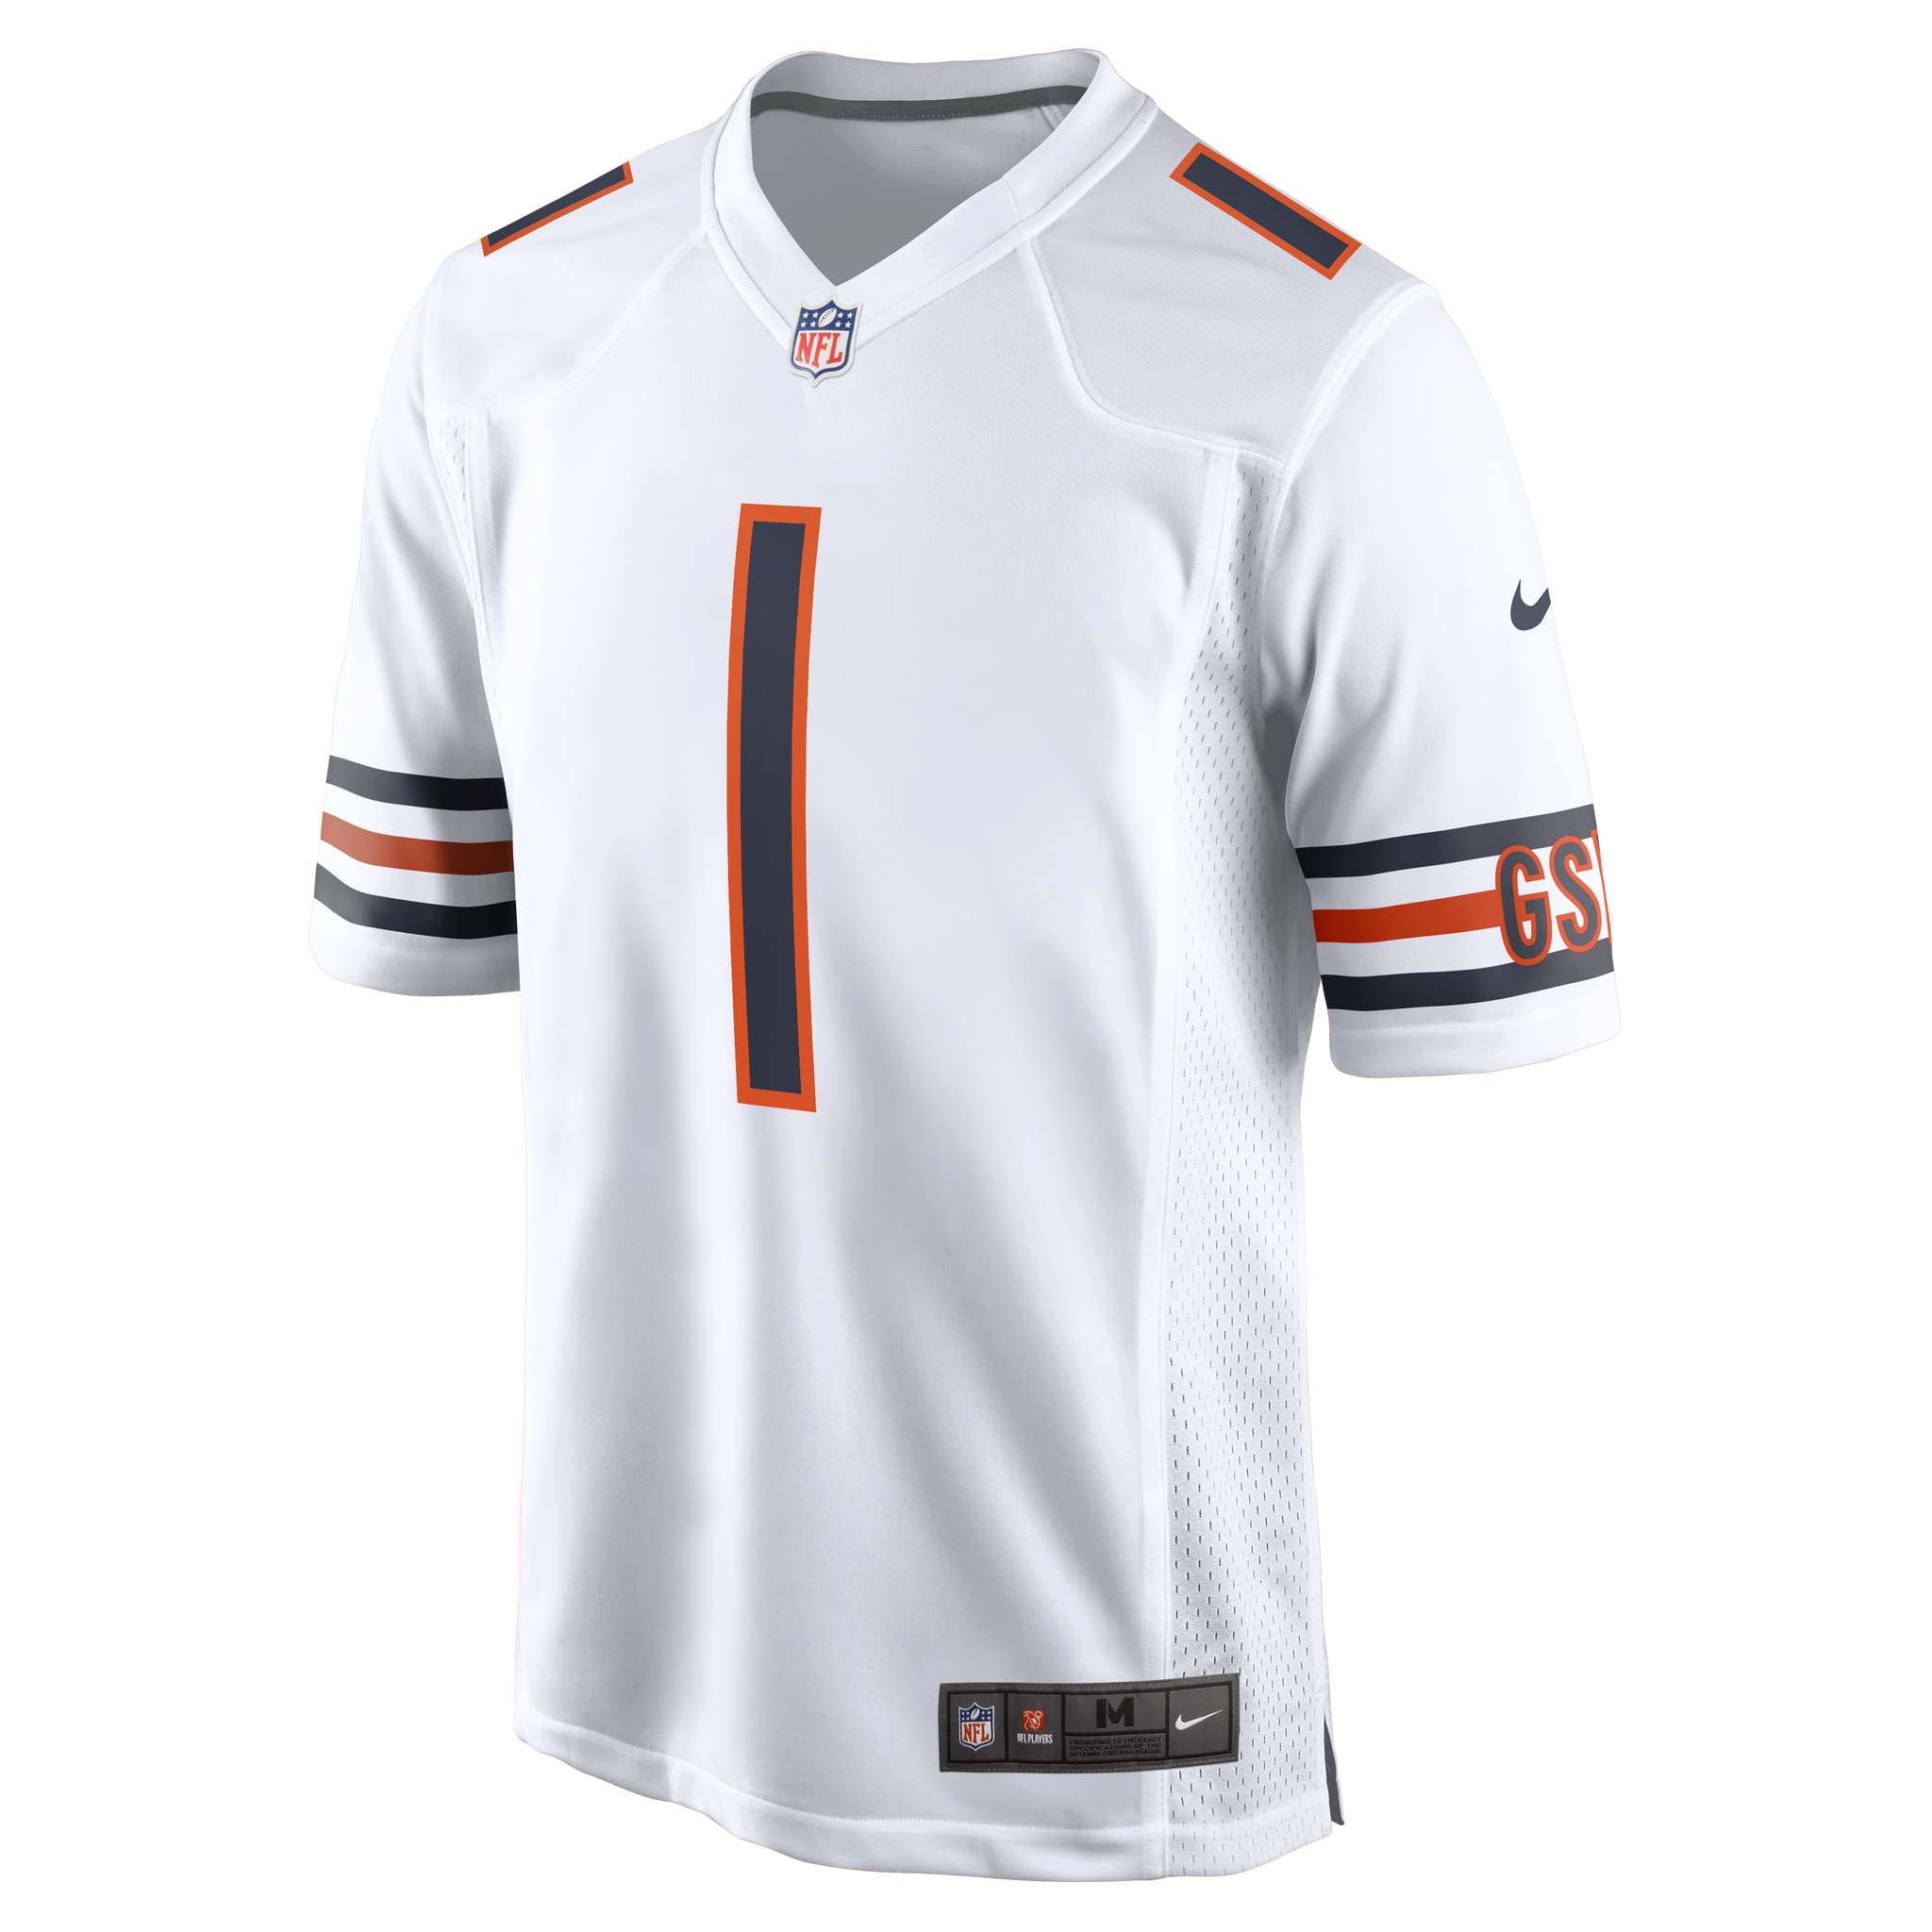 chicago bears jersey white